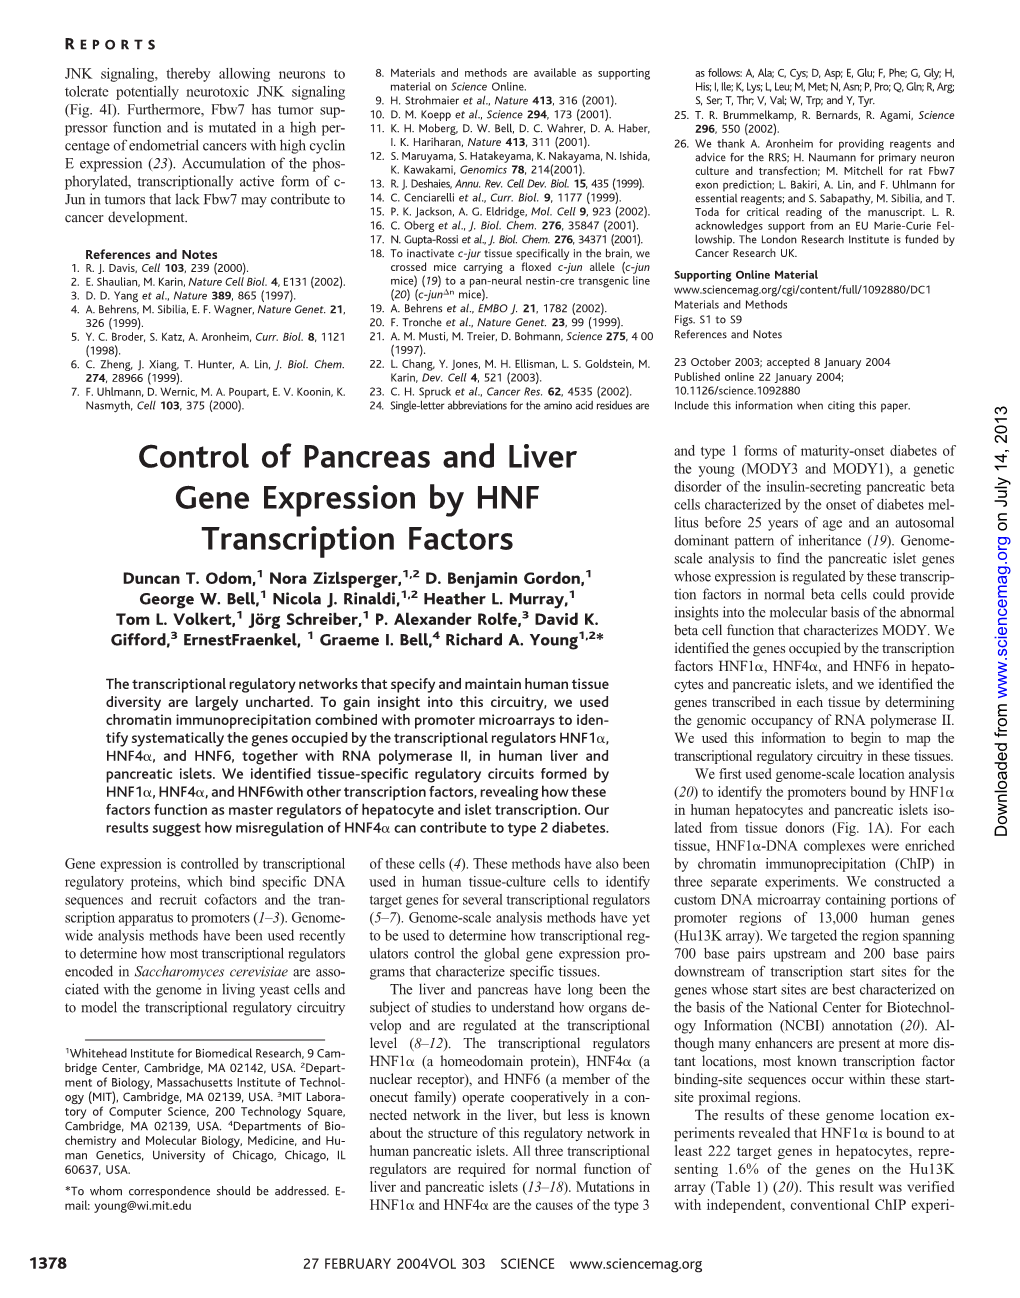 Control of Pancreas and Liver Gene Expression by HNF Transcription Factors